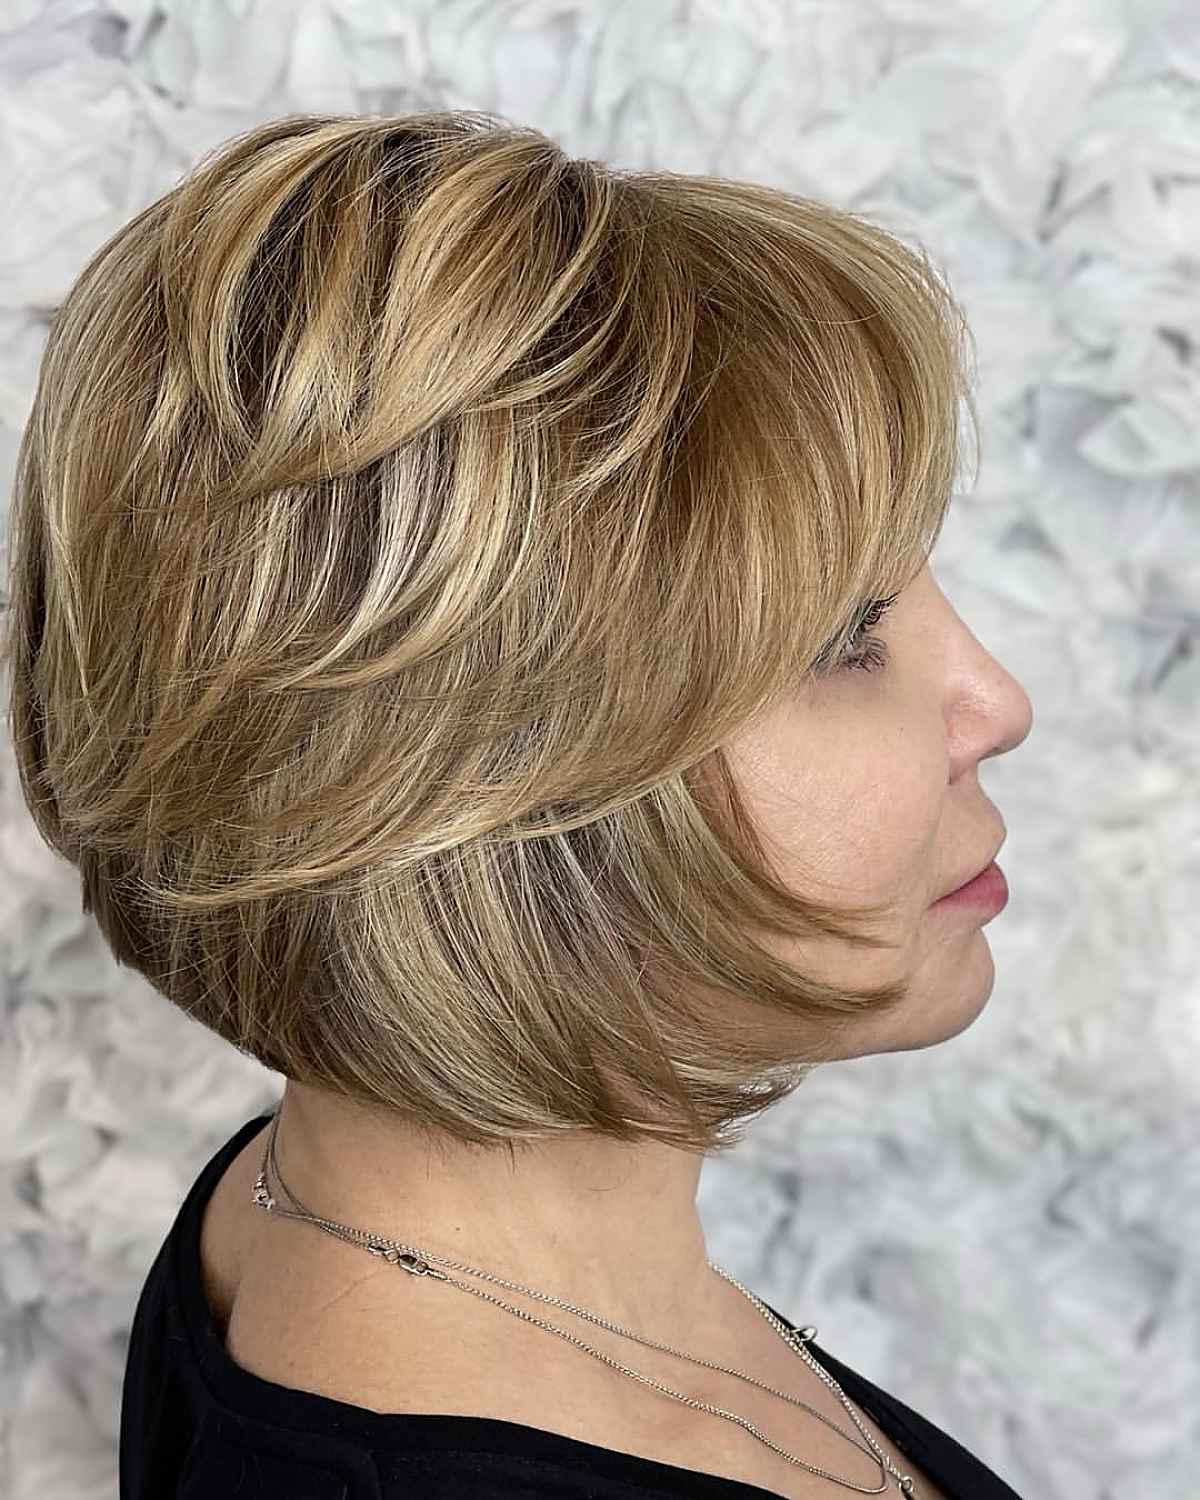 19 Cutest Chin-Length Layered Bobs for a Fresh, Short Look